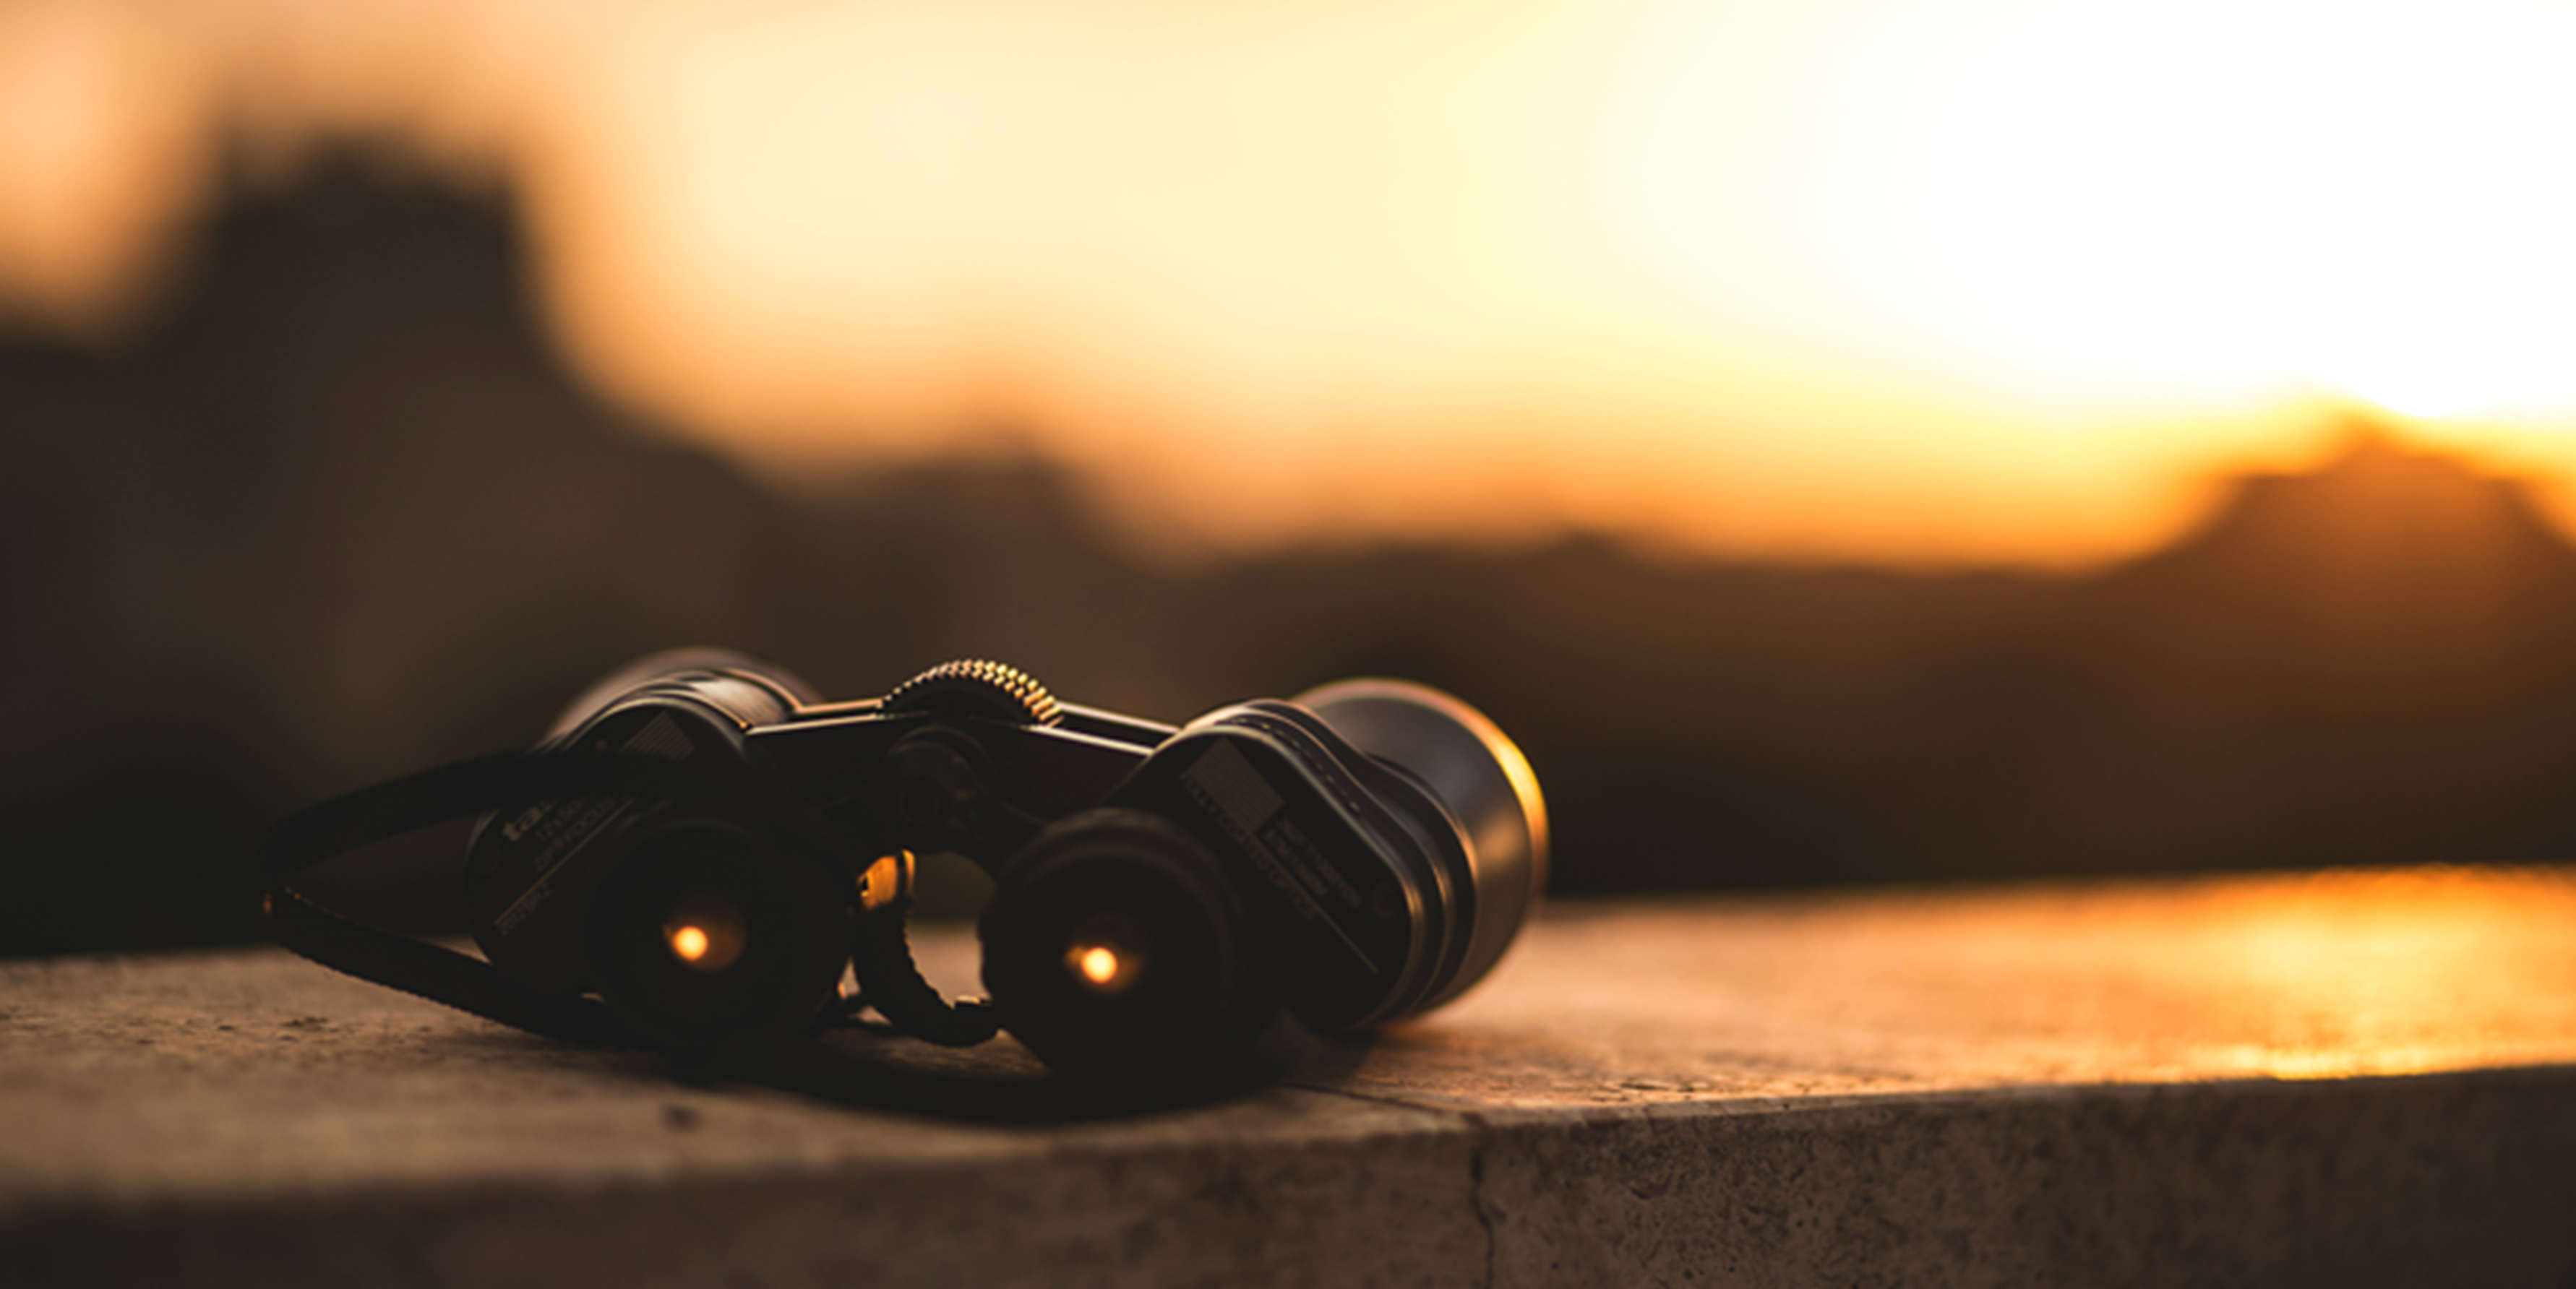 Photograph of a pair of binoculars on a wall at sunset